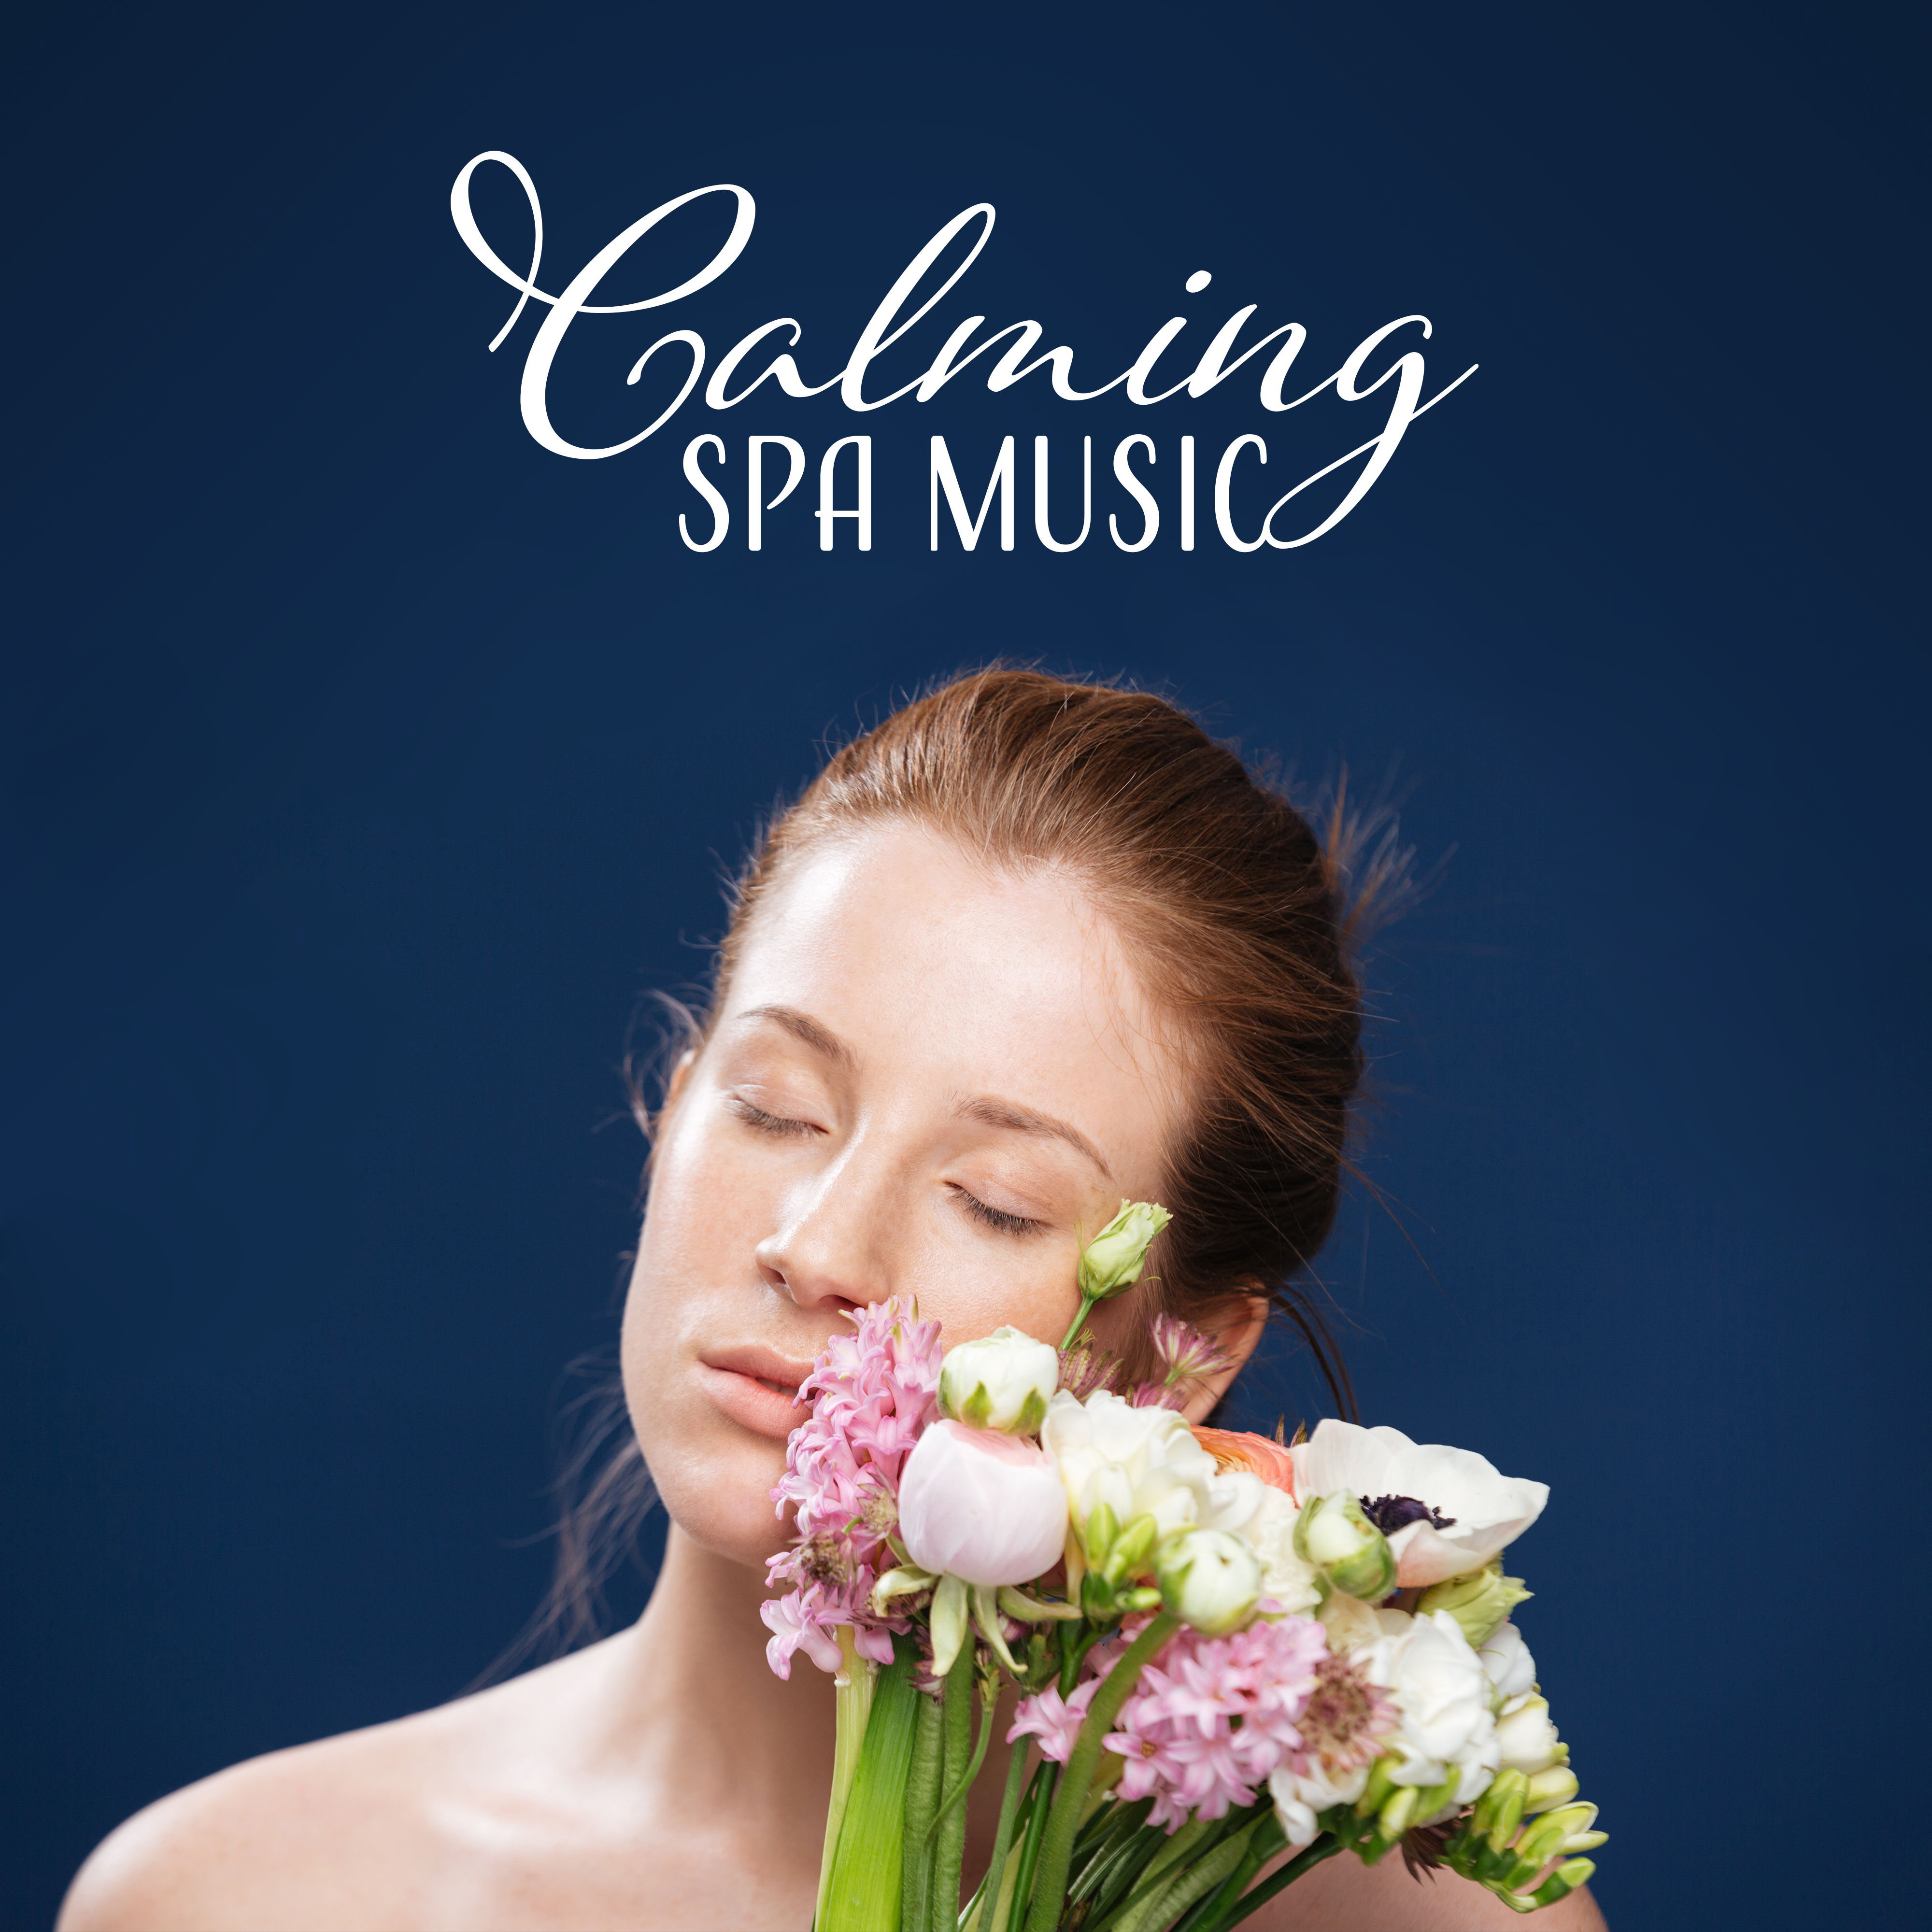 Calming Spa Music – Relaxing Music for Spa, Beauty Treatments, Hotel Wellness, Nature Sounds